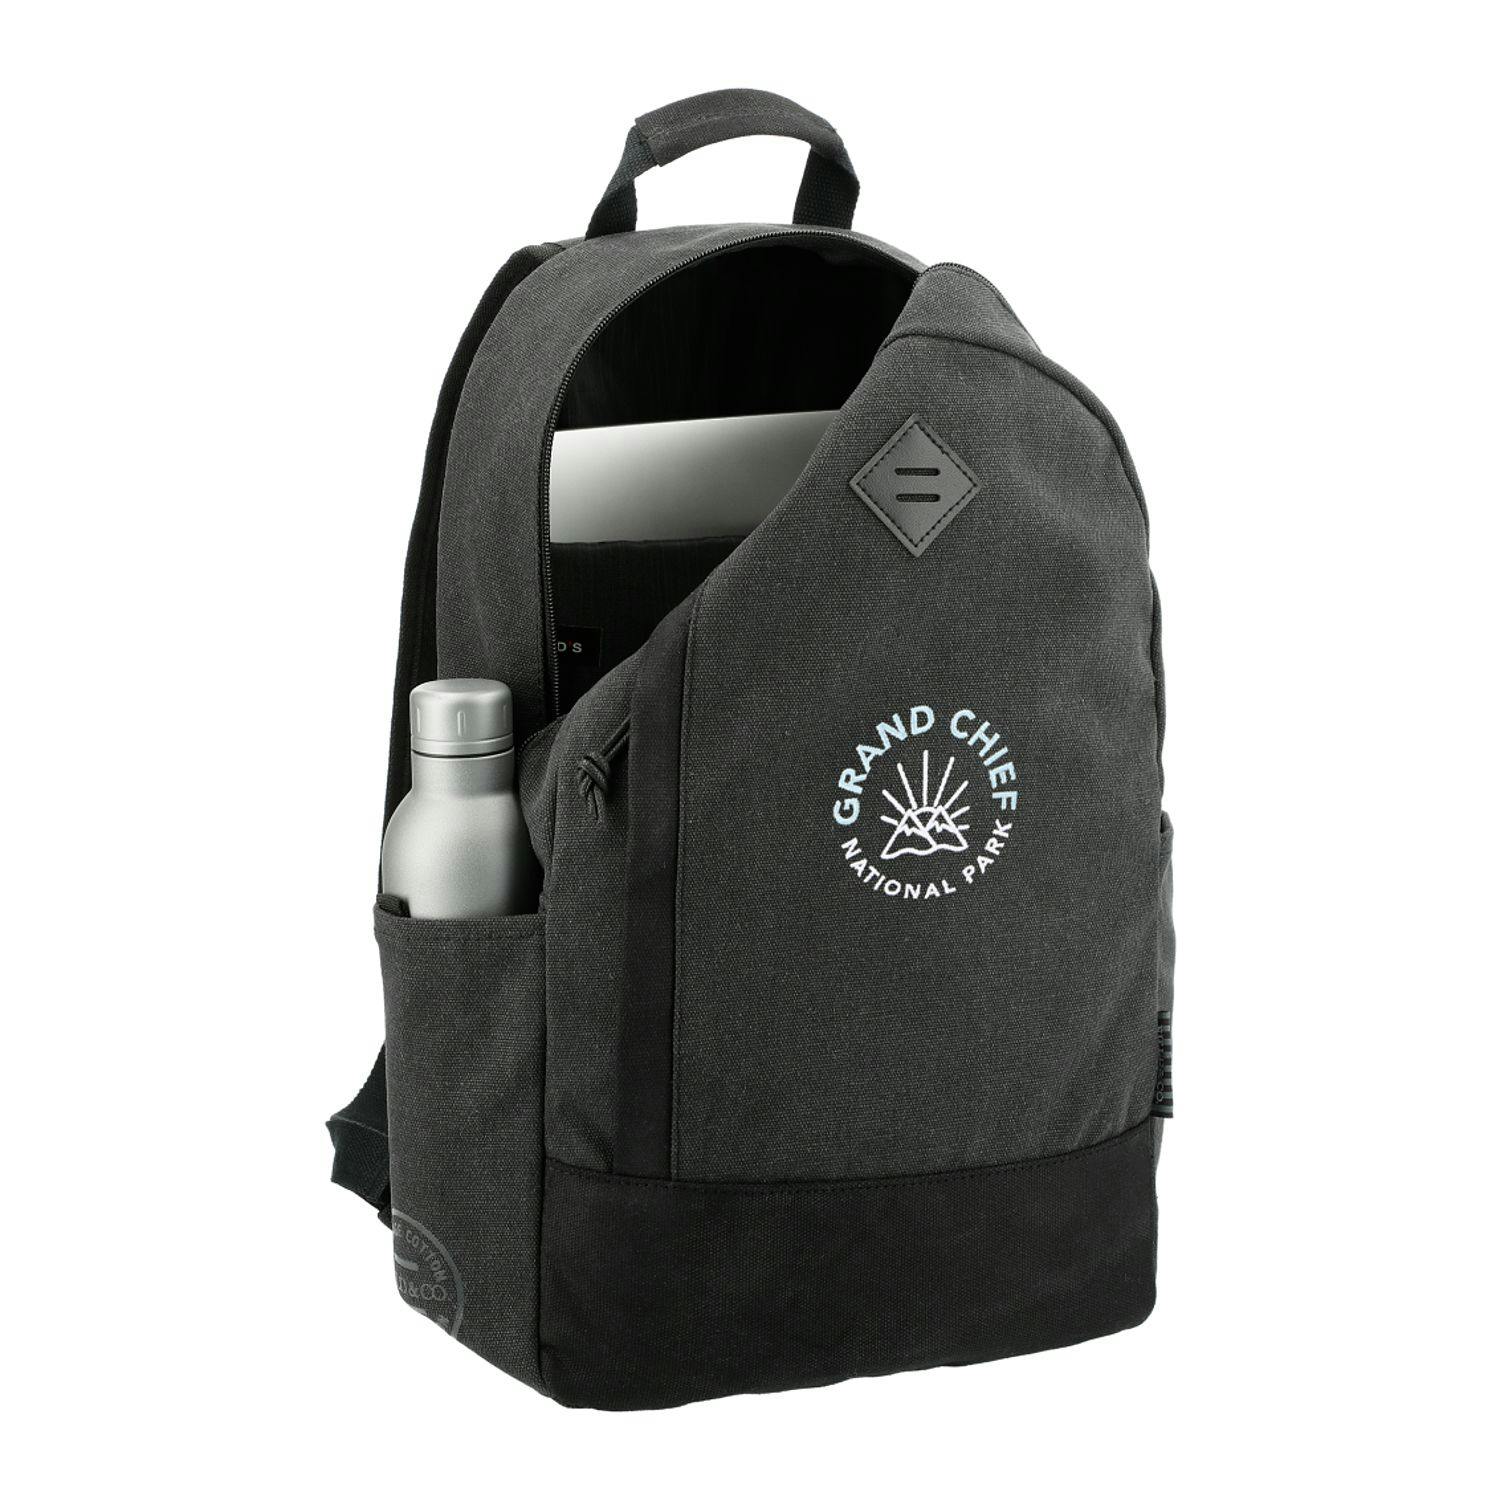 Field & Co. Woodland 15" Computer Backpack - additional Image 1